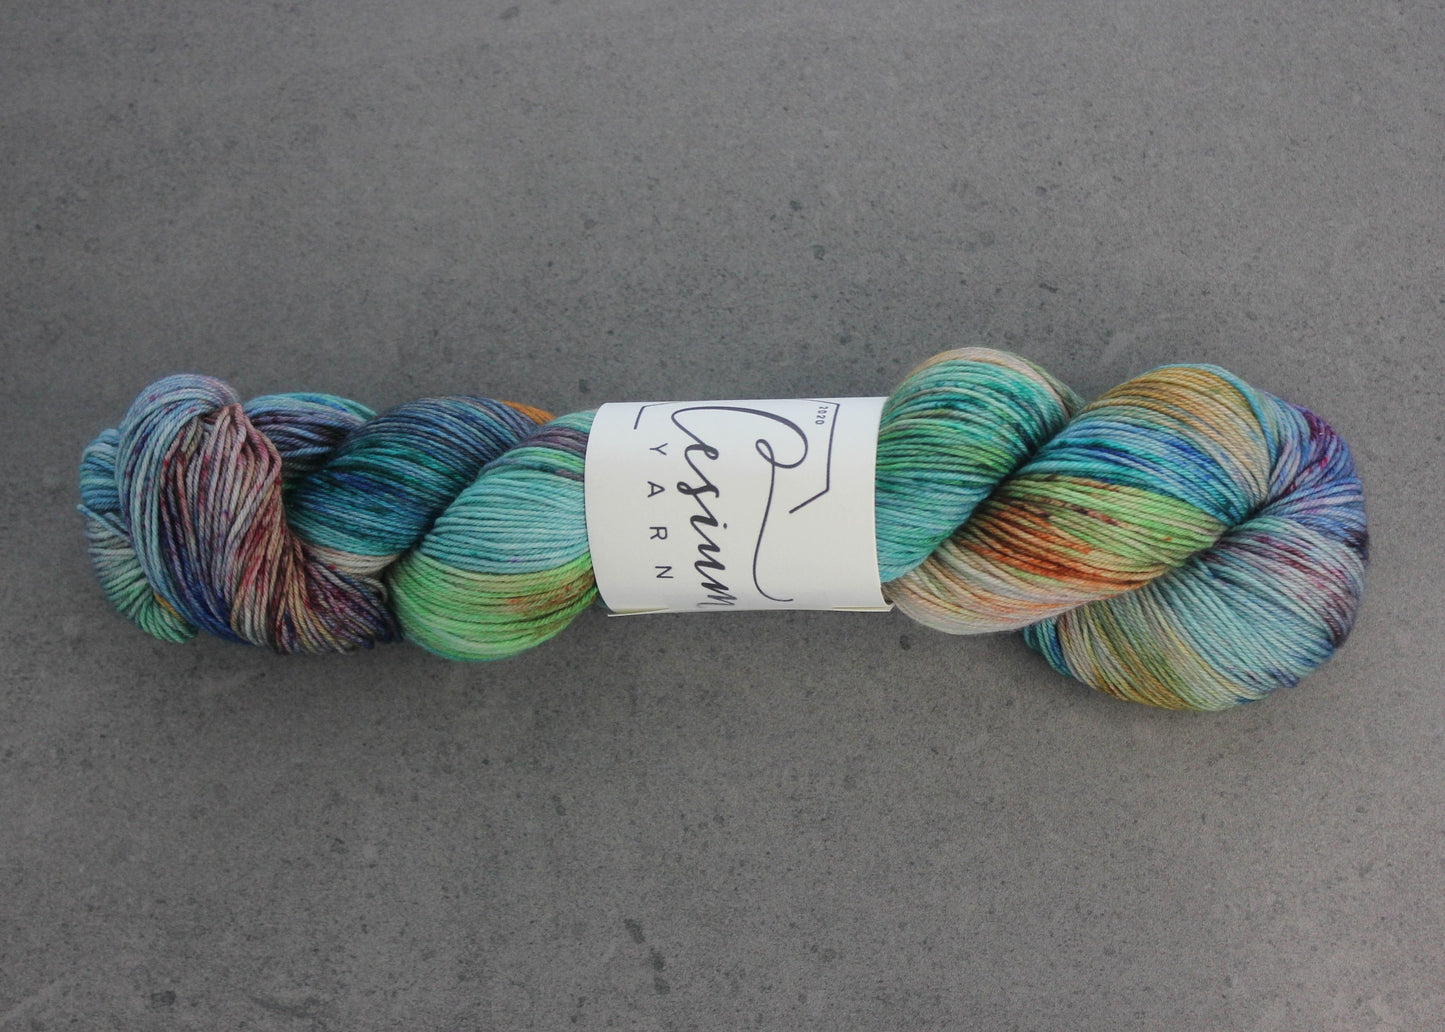 A skein of reserved multicolored hand-dyed yarn with sections of blue, aqua, green, burgundy, orange, and white.